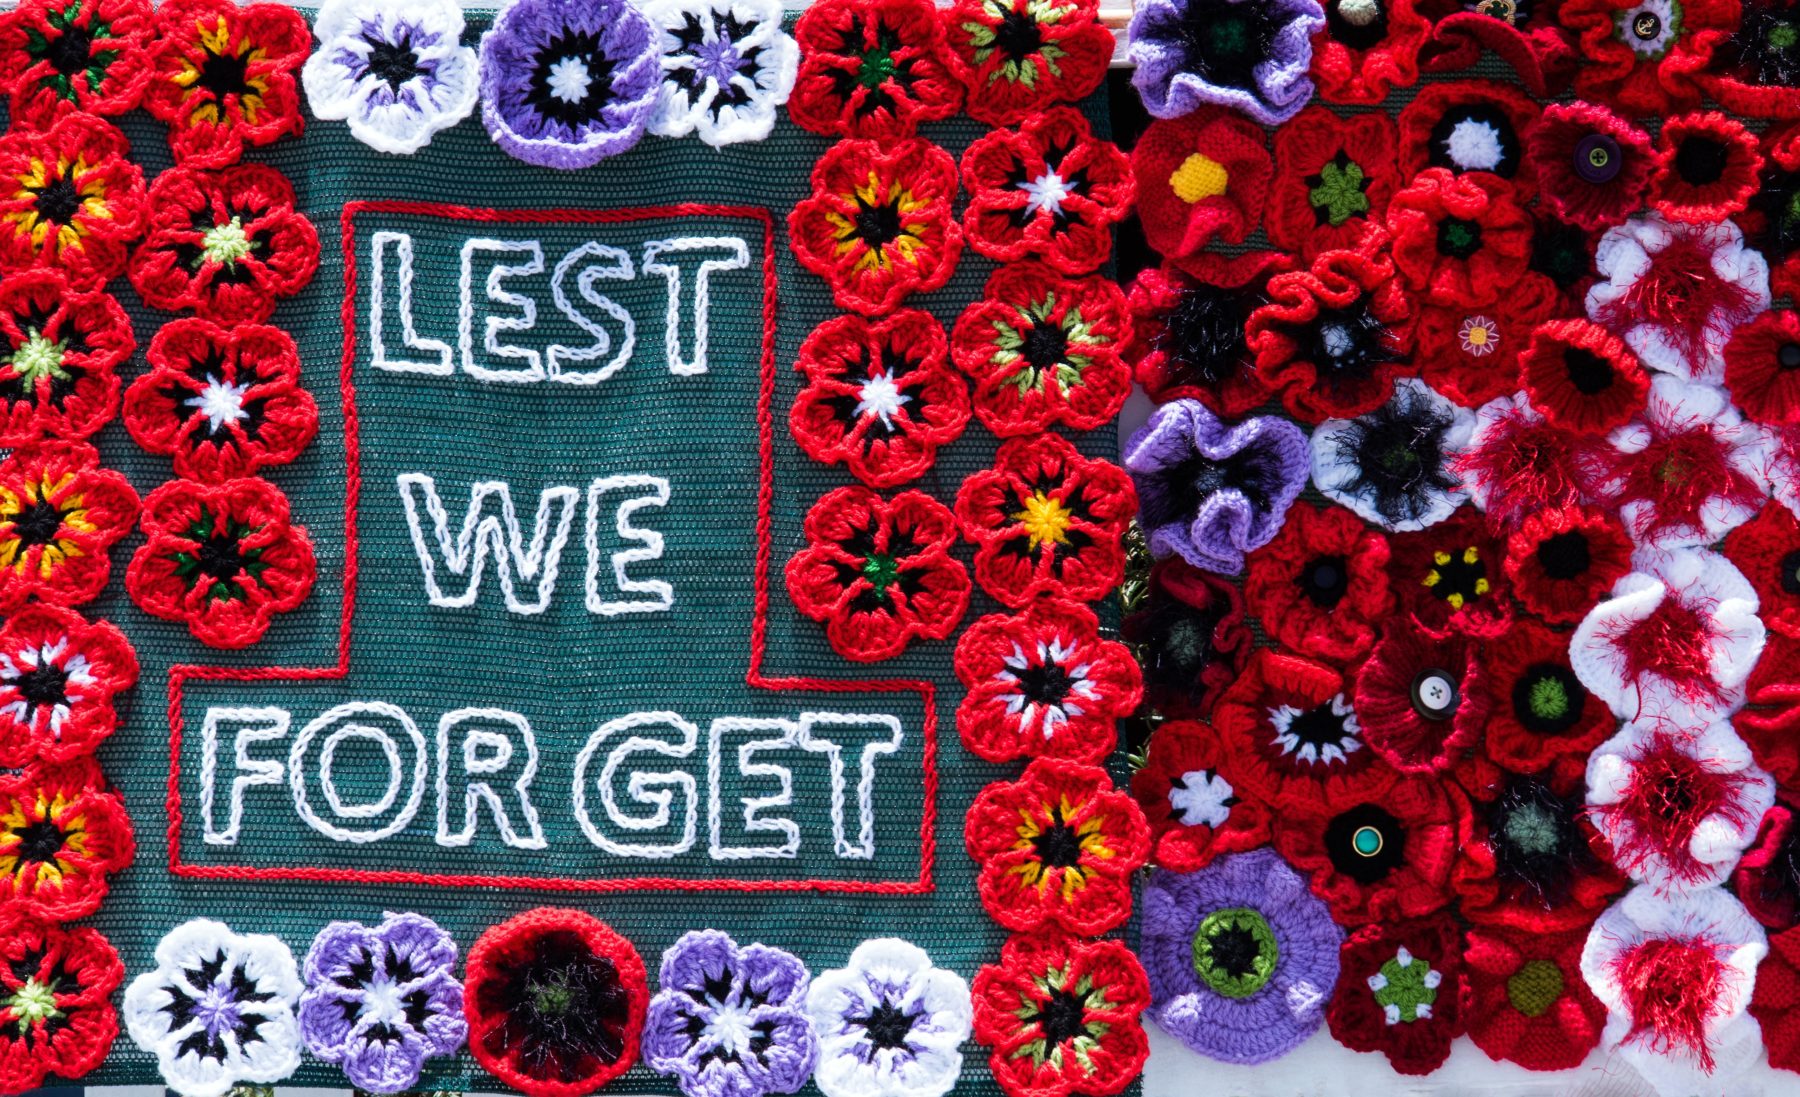 An ANZAC memorial with the words "lest we forget" embroidered on it.